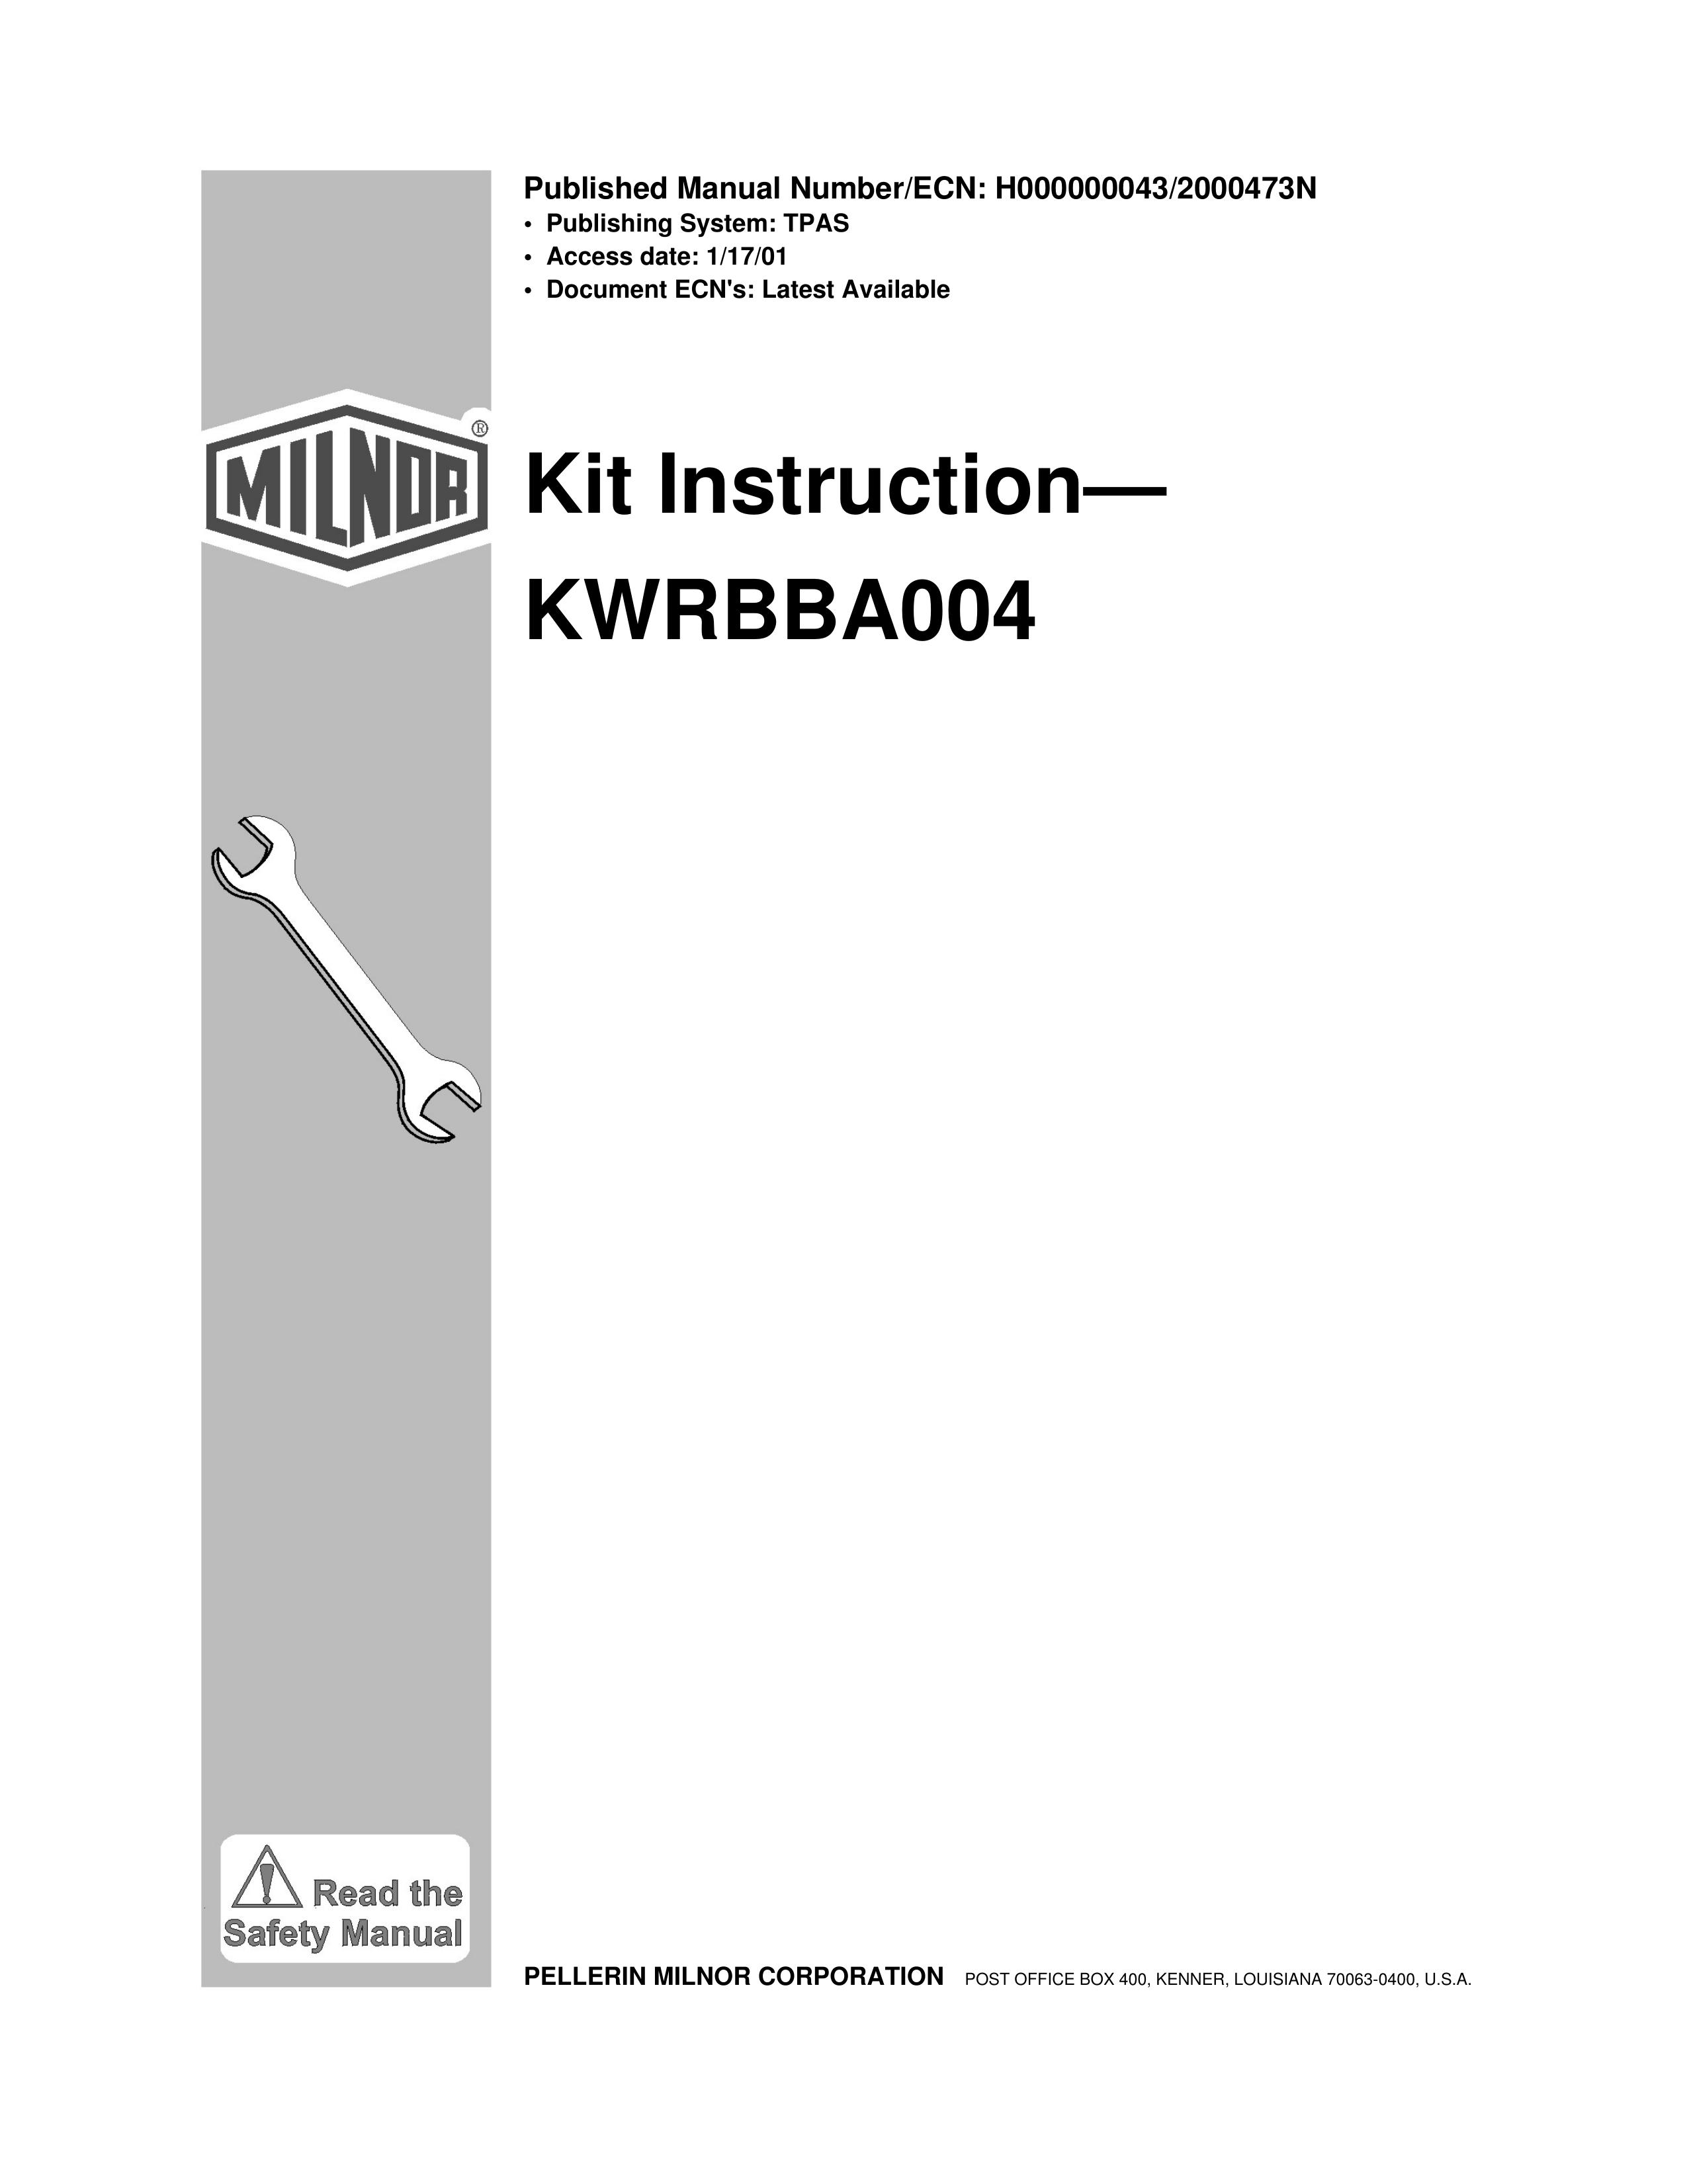 Milnor KWRBBA004 Clothes Dryer User Manual